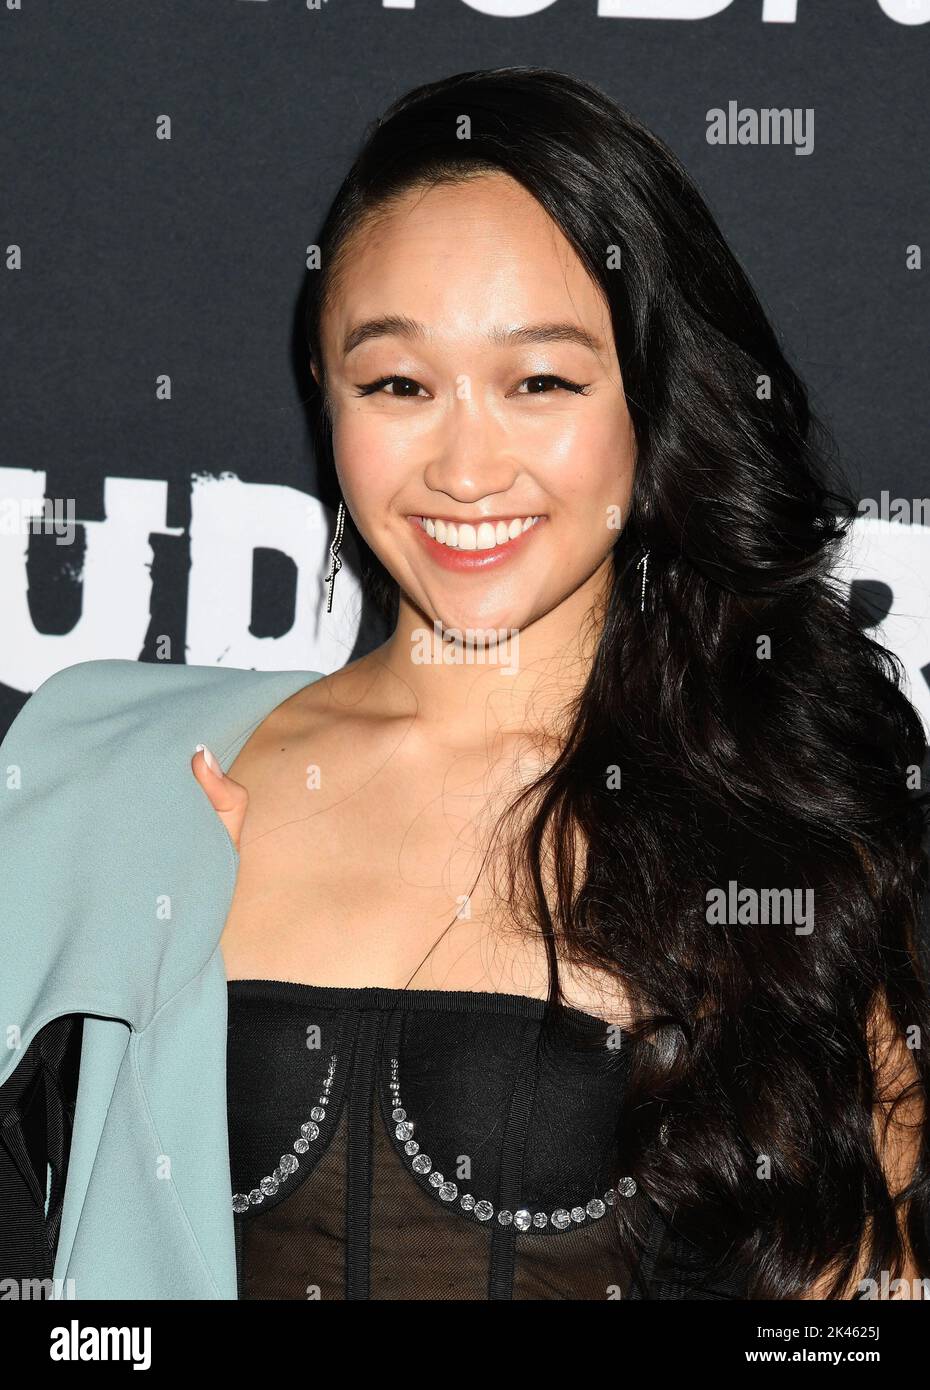 Santa Monica, Ca. 29th Sep, 2022. Cathy Ang attends the special screening of 'My Best Friend's Exorcism' at the Aero Theatre on September 29, 2022 in Santa Monica, California. Credit: Jeffrey Mayer/Jtm Photos/Media Punch/Alamy Live News Stock Photo